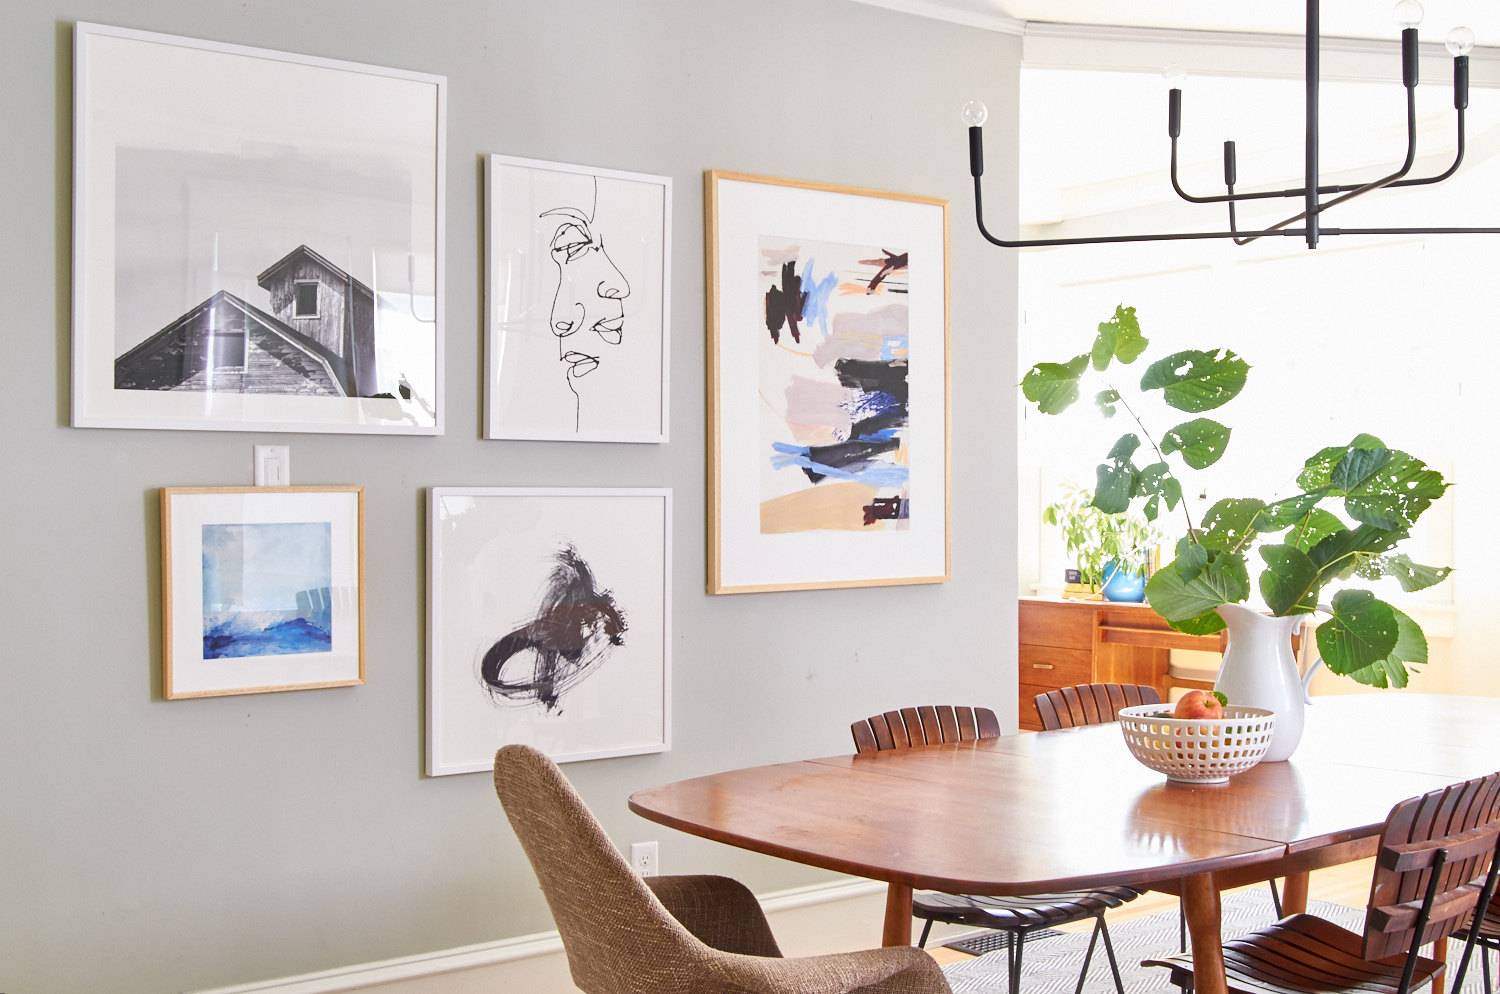 A dining room table with a plant on it sits near a wall with paintings on it.